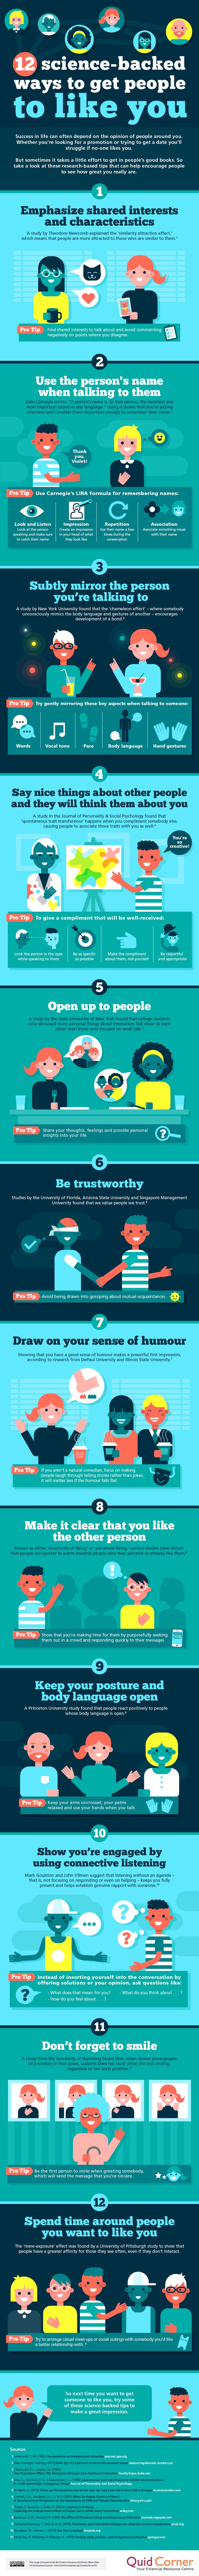 12 Science-Backed Ways to Get People to Like You - infographic